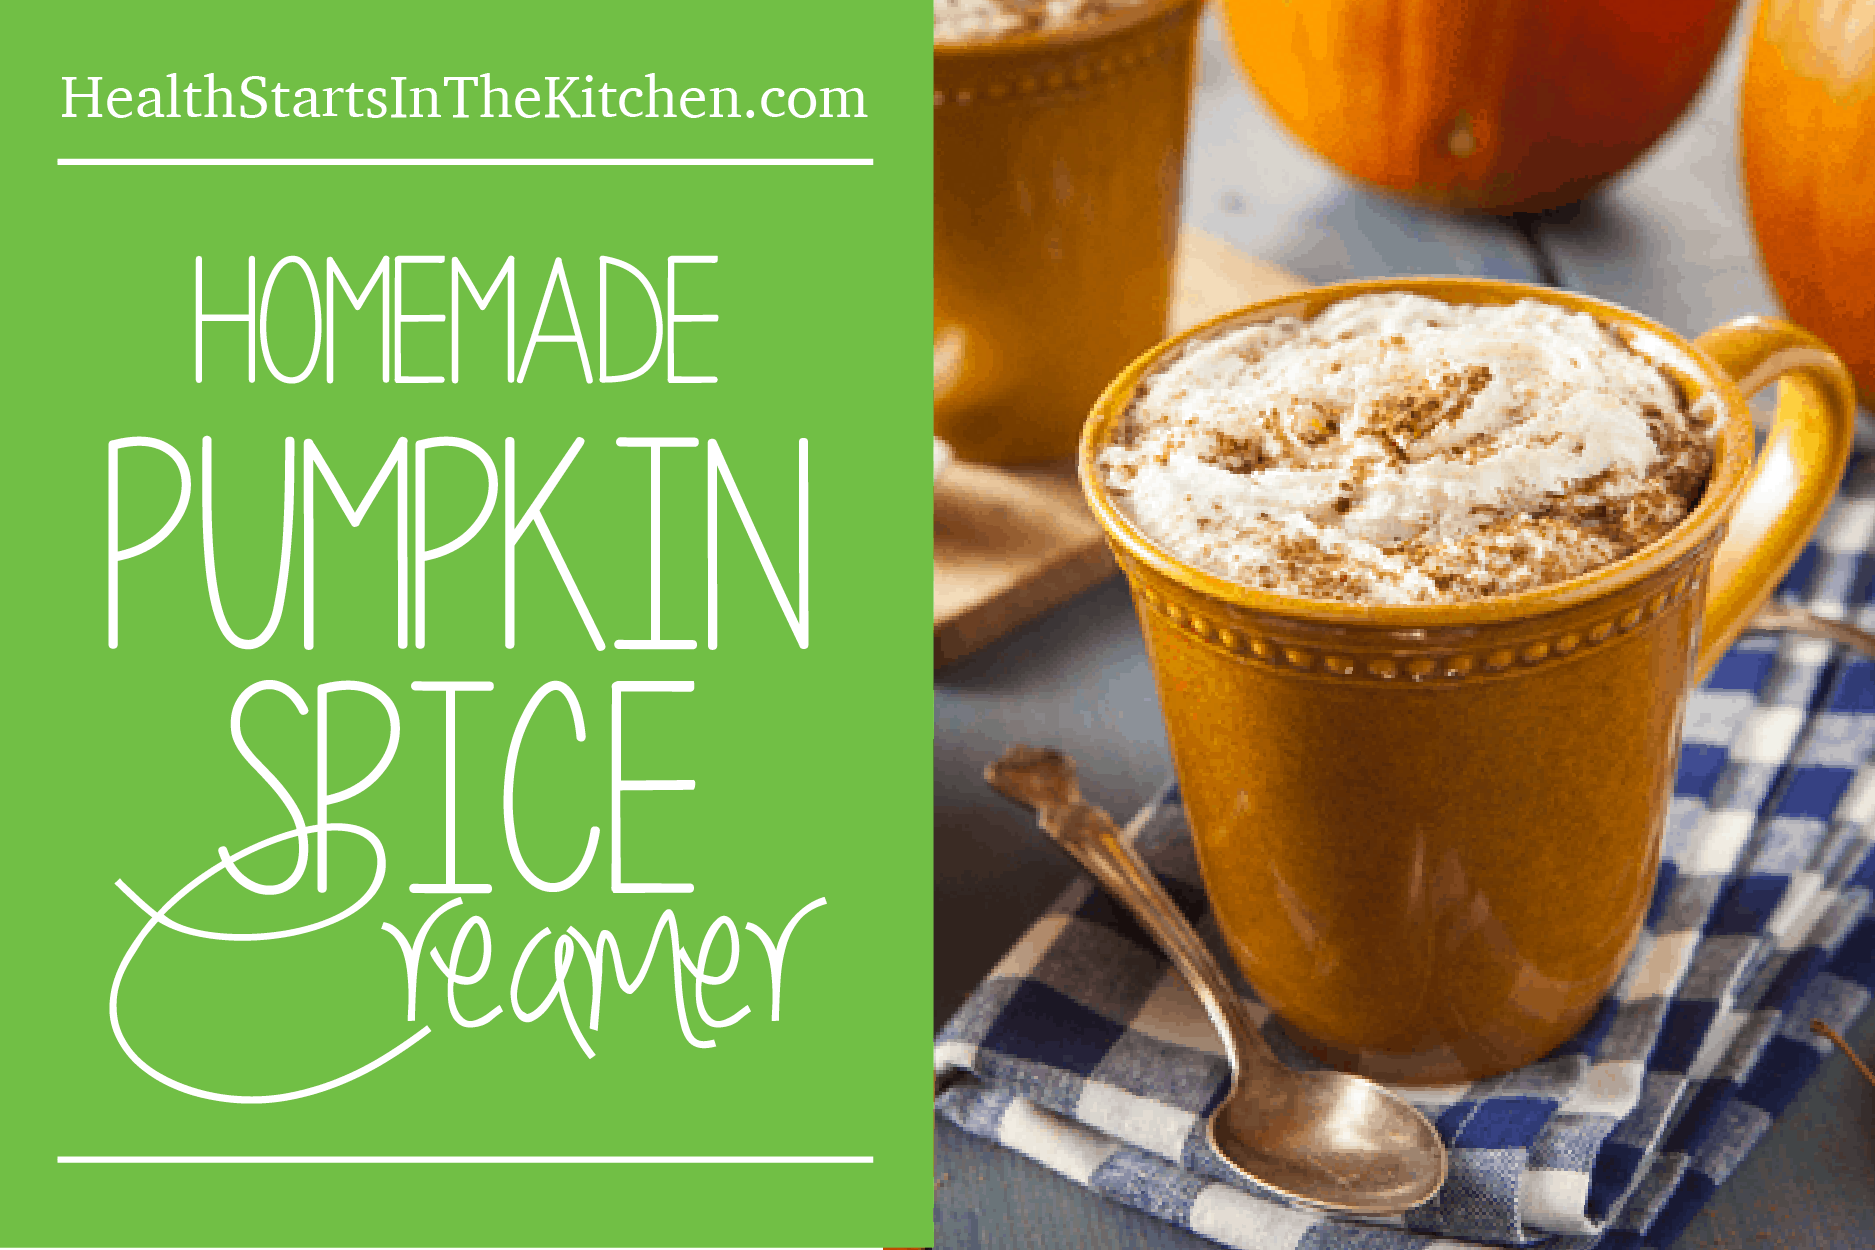 Homemade Pumpkin Spice Creamer, made with healthy, all-natural ingredients.